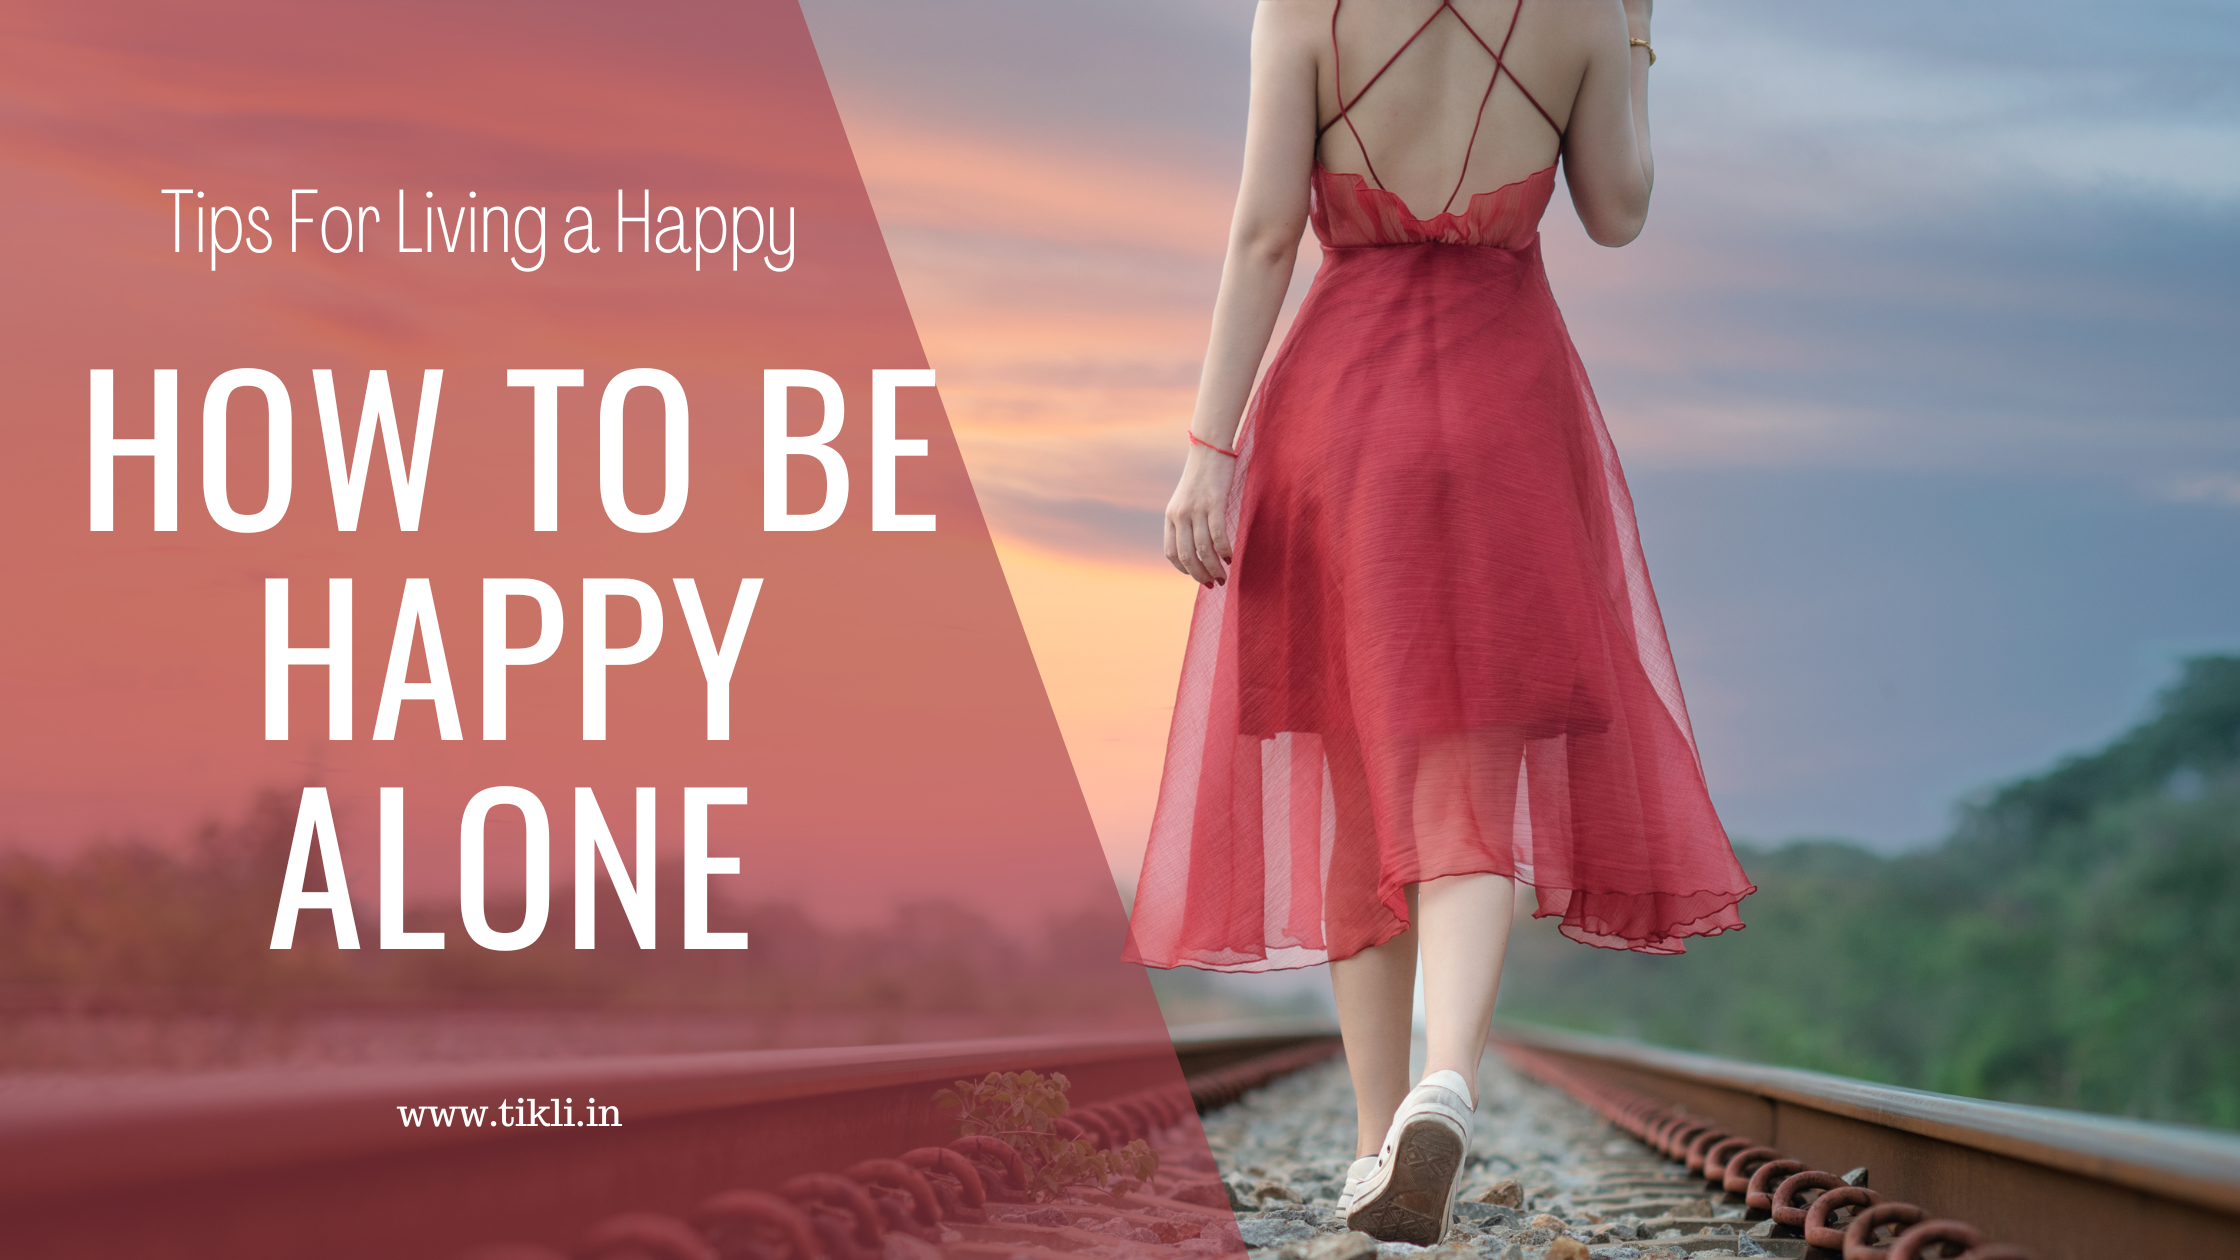 How To Be Happy Alone